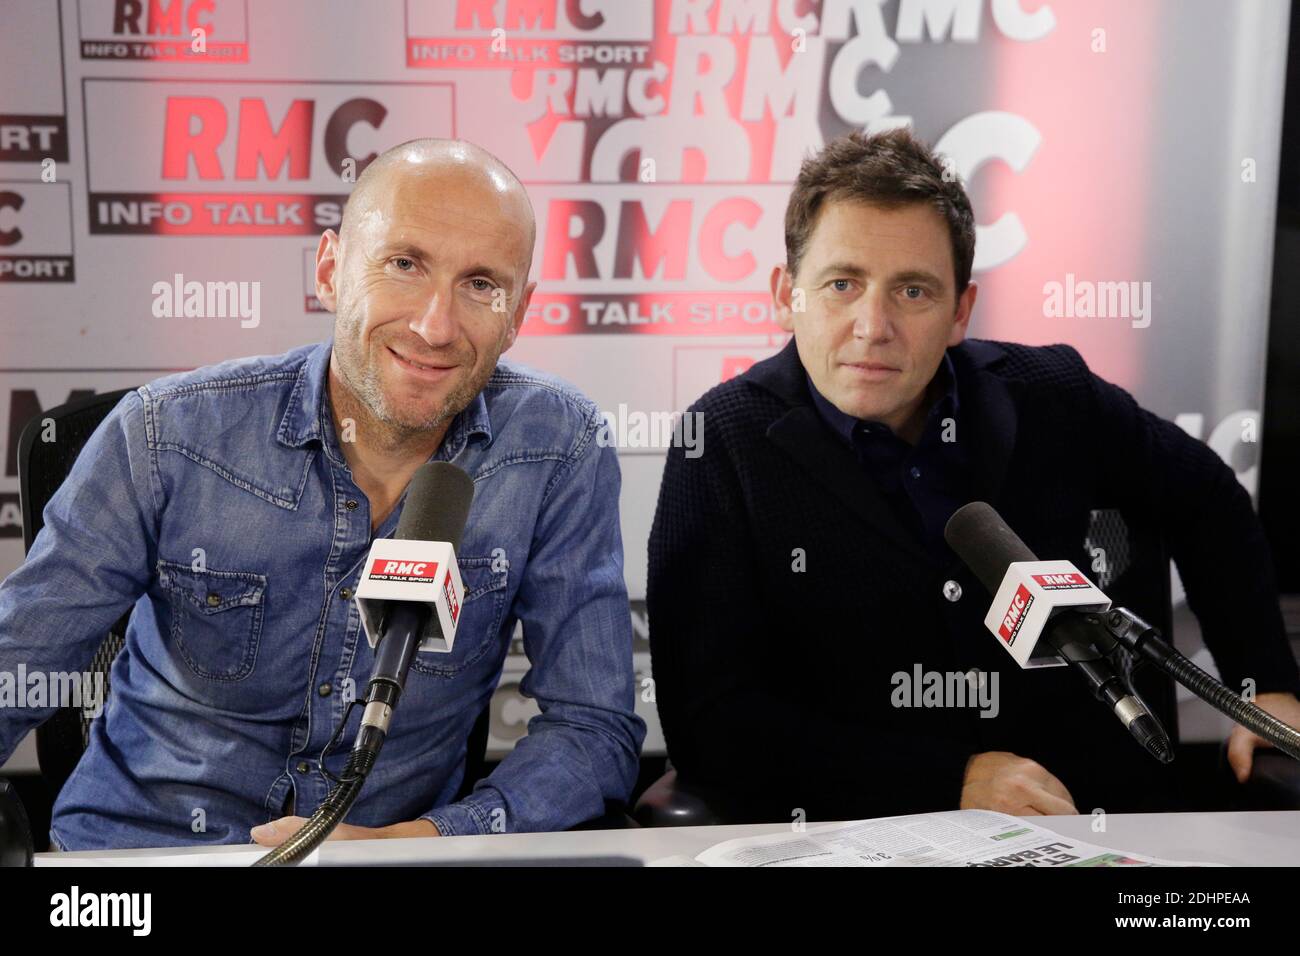 Exclusive - Gilbert Brisbois and Daniel Riolo at the 'L'After Foot' talk  show on RMC Radio, in Paris, France, on February 24, 2016. Photo by Jerome  Domine/ABACAPRESS.COM Stock Photo - Alamy